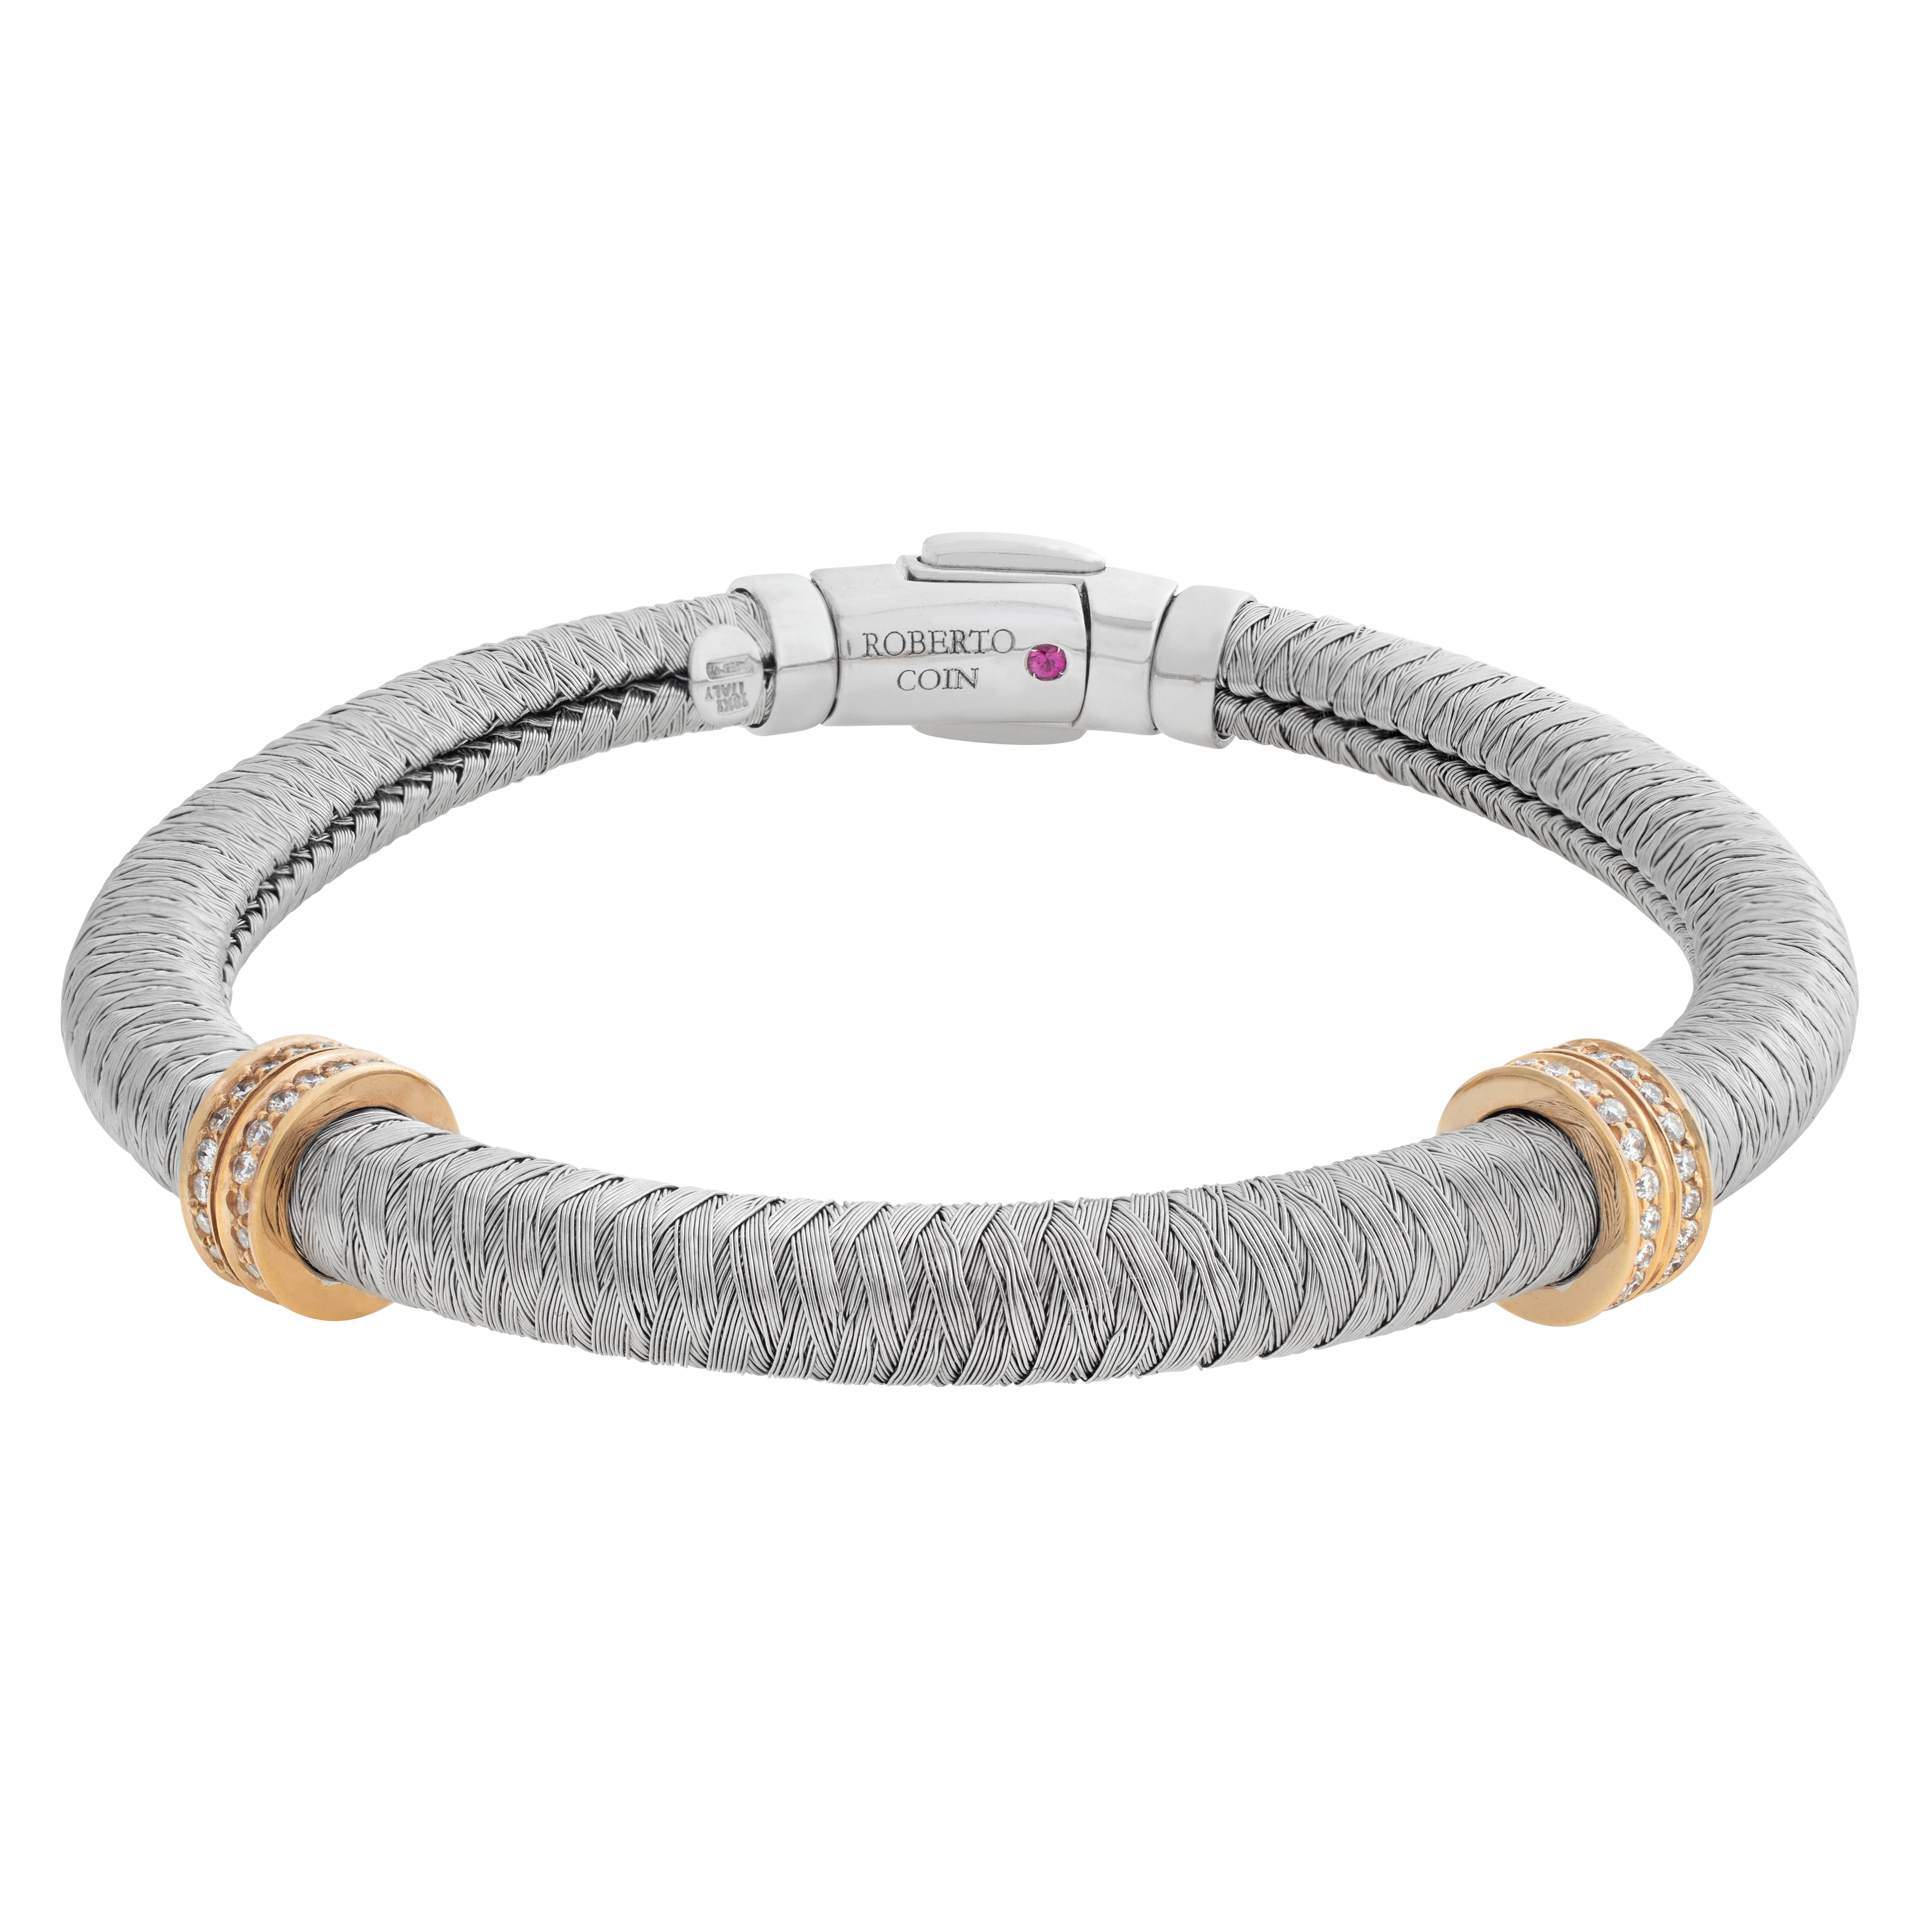 Roberto Coin Primavera Collection, Flexible Weaved Coil Bracelet In 18k White Gold, With 2 Rose Gold Diamond Stations.